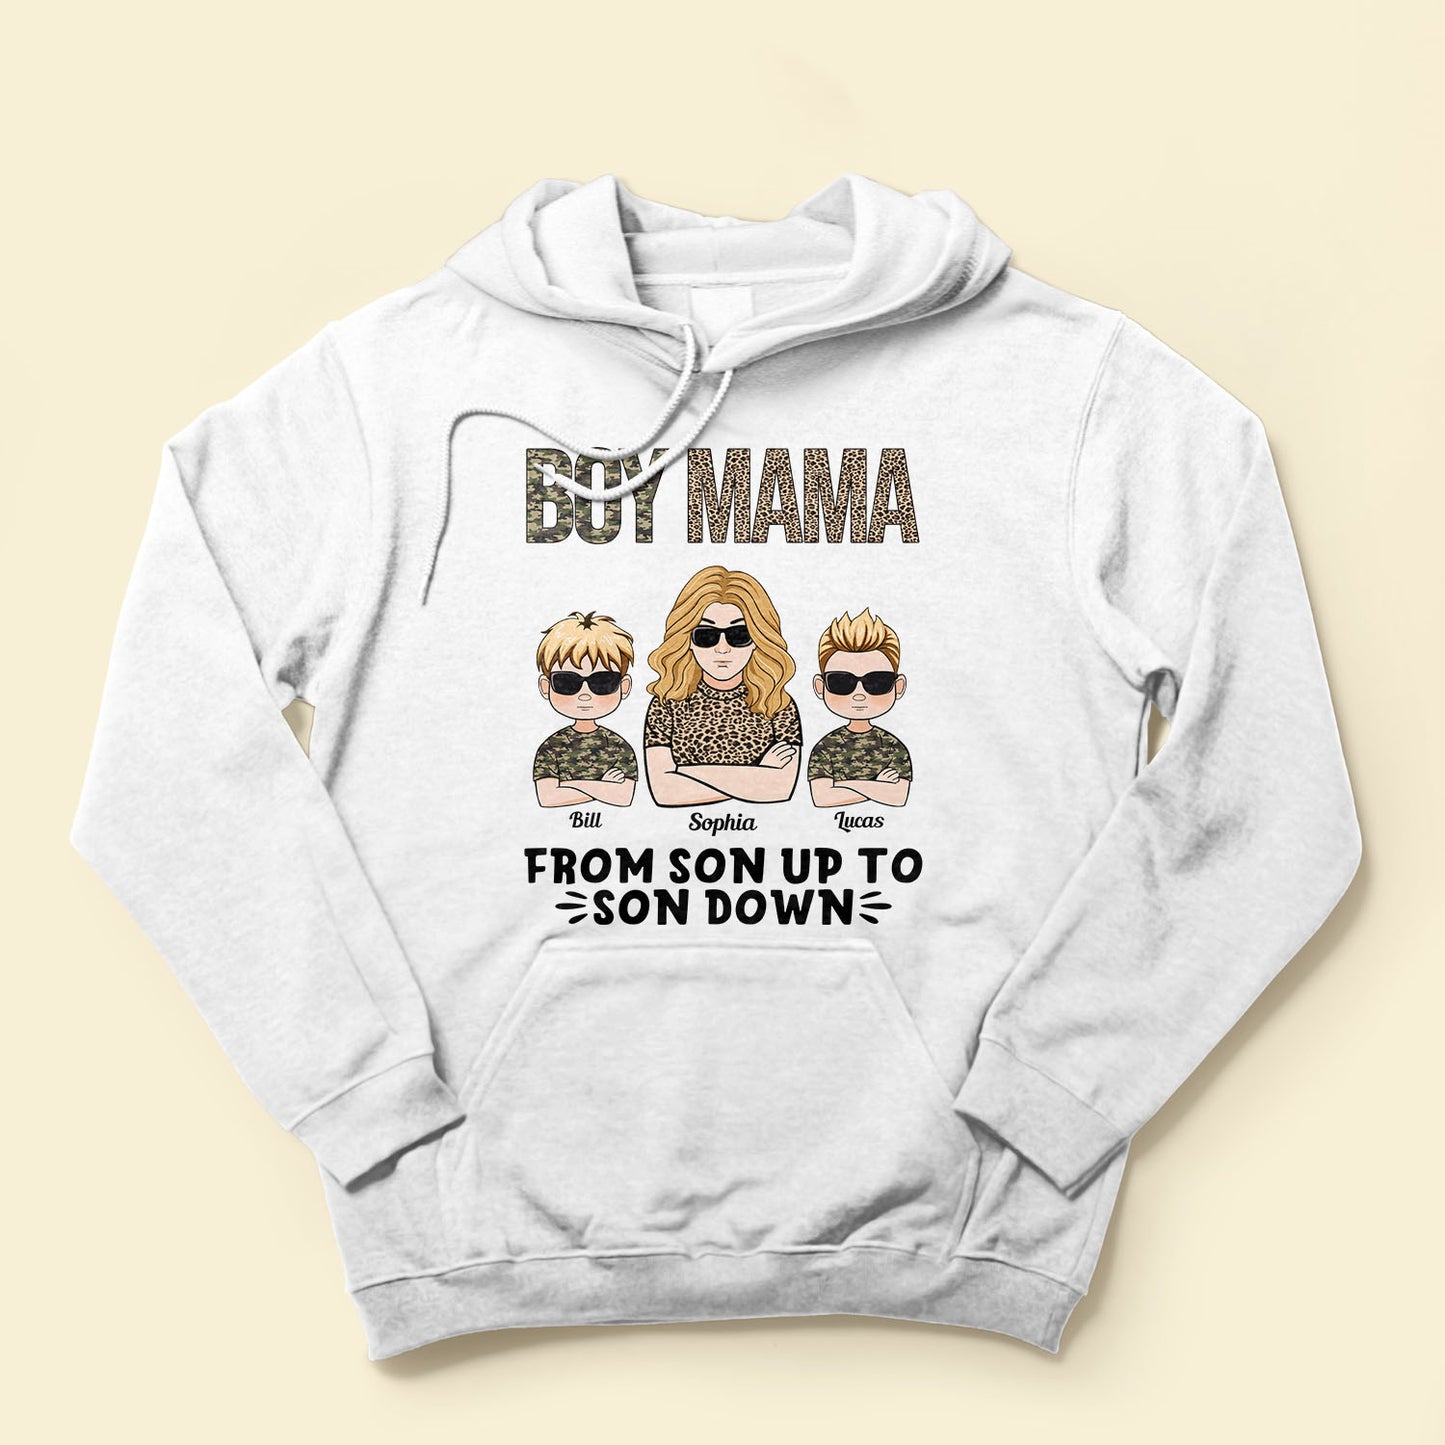 Funny Mothers Day Gift From Son Mom Always Awesome Shirt & Hoodie